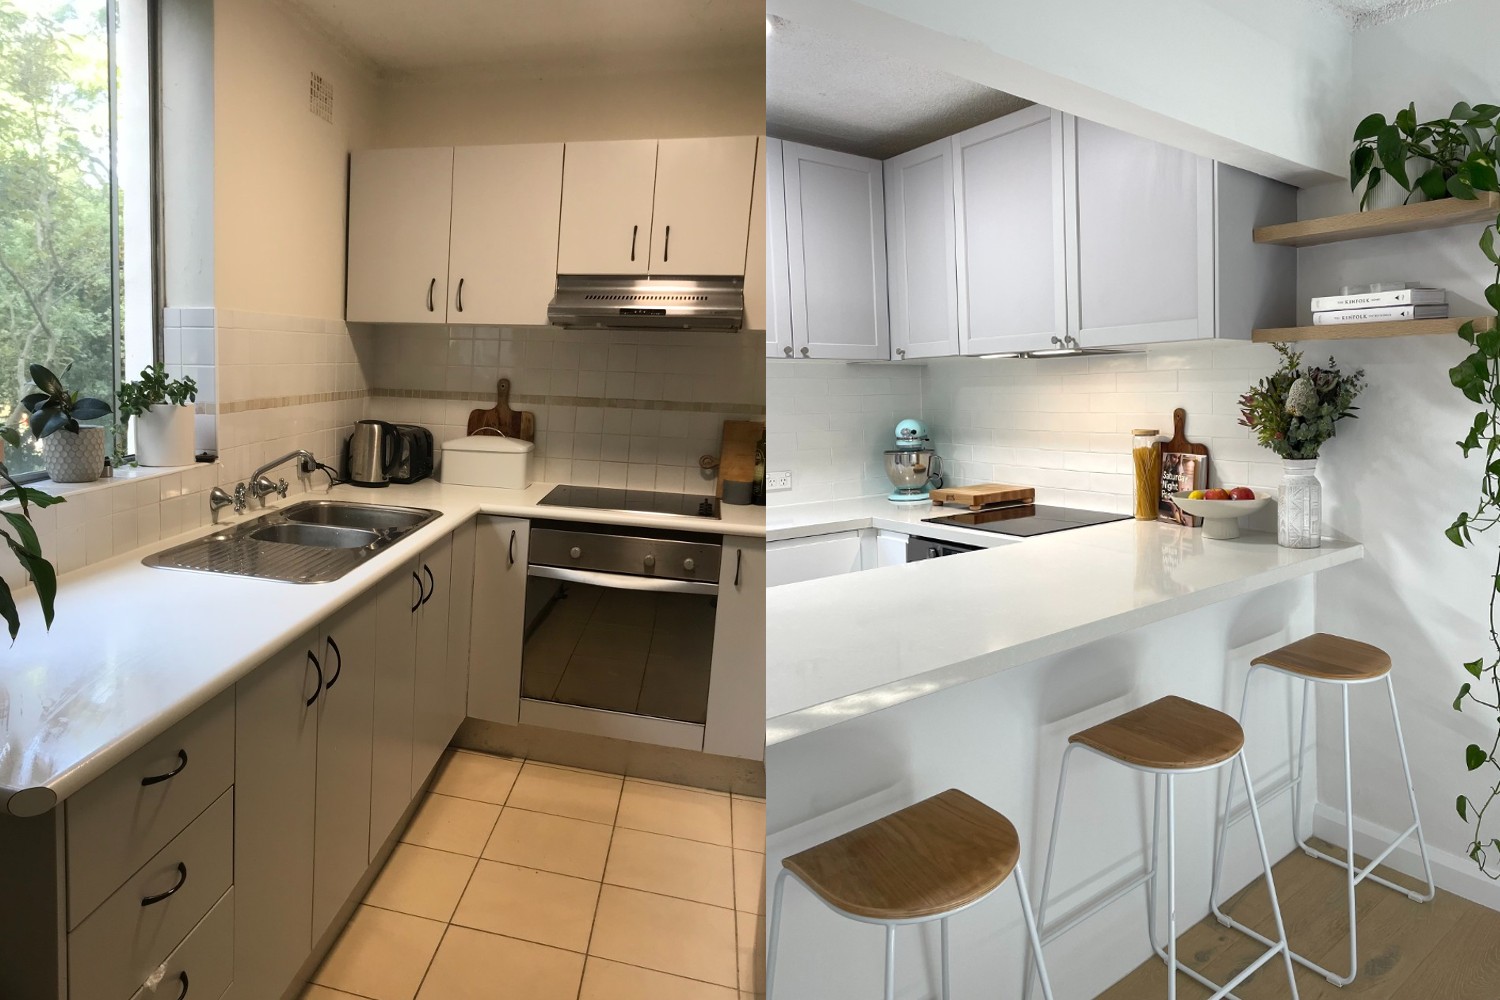 Kitchen Renovation before and after image